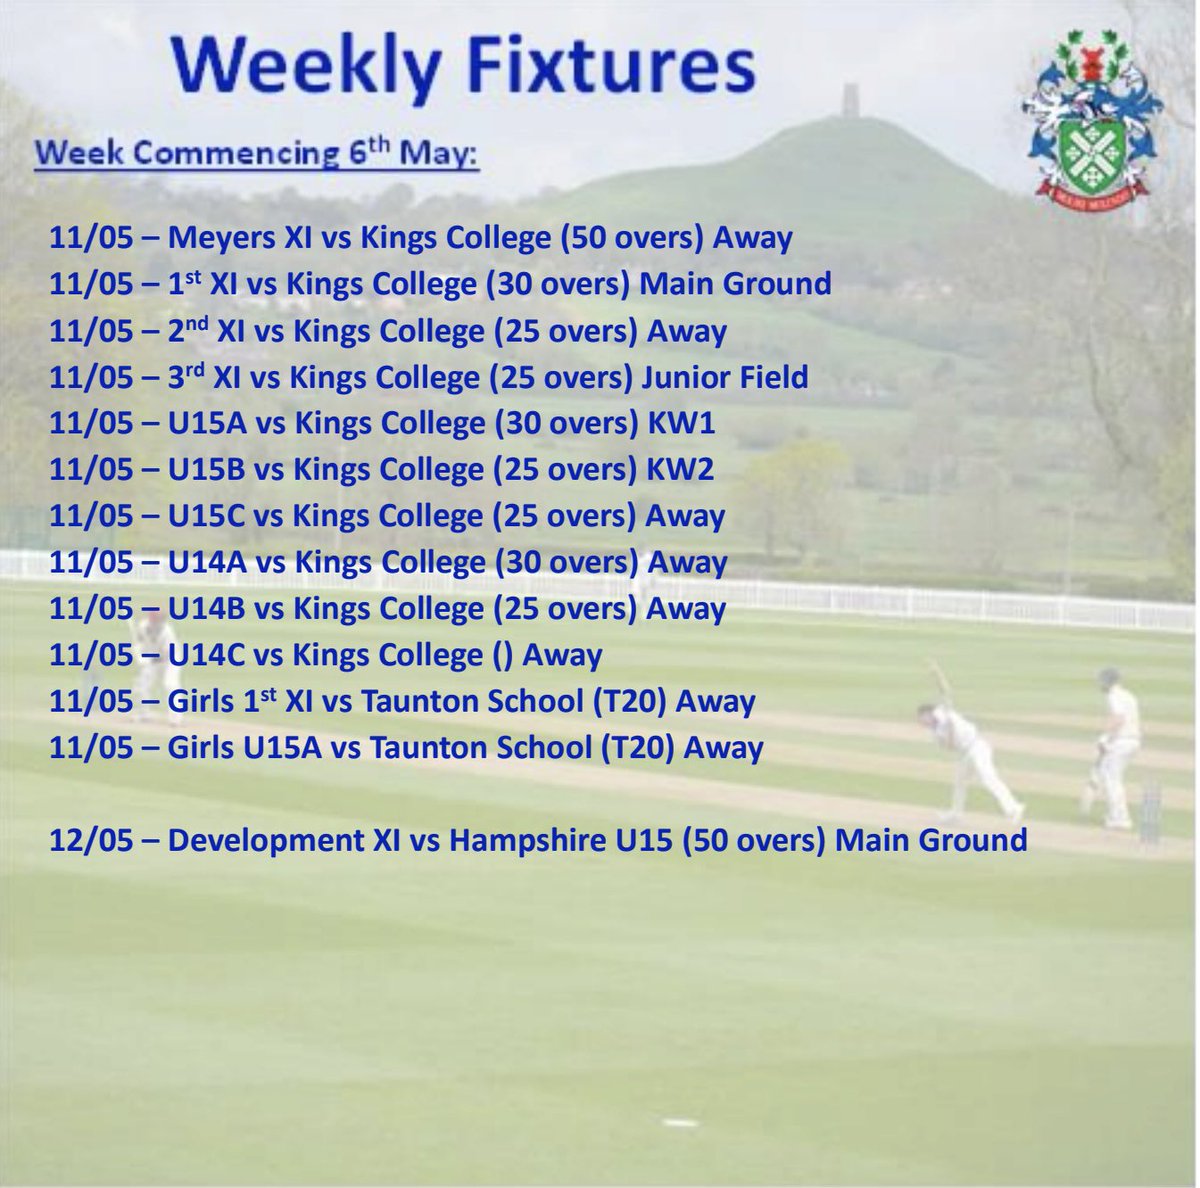 Heading into the third week of the term with many more exciting fixtures. Three more national cup games across the board and two loads of block fixtures against Sherborne School & Kings College🏏💥 #schoolcricket